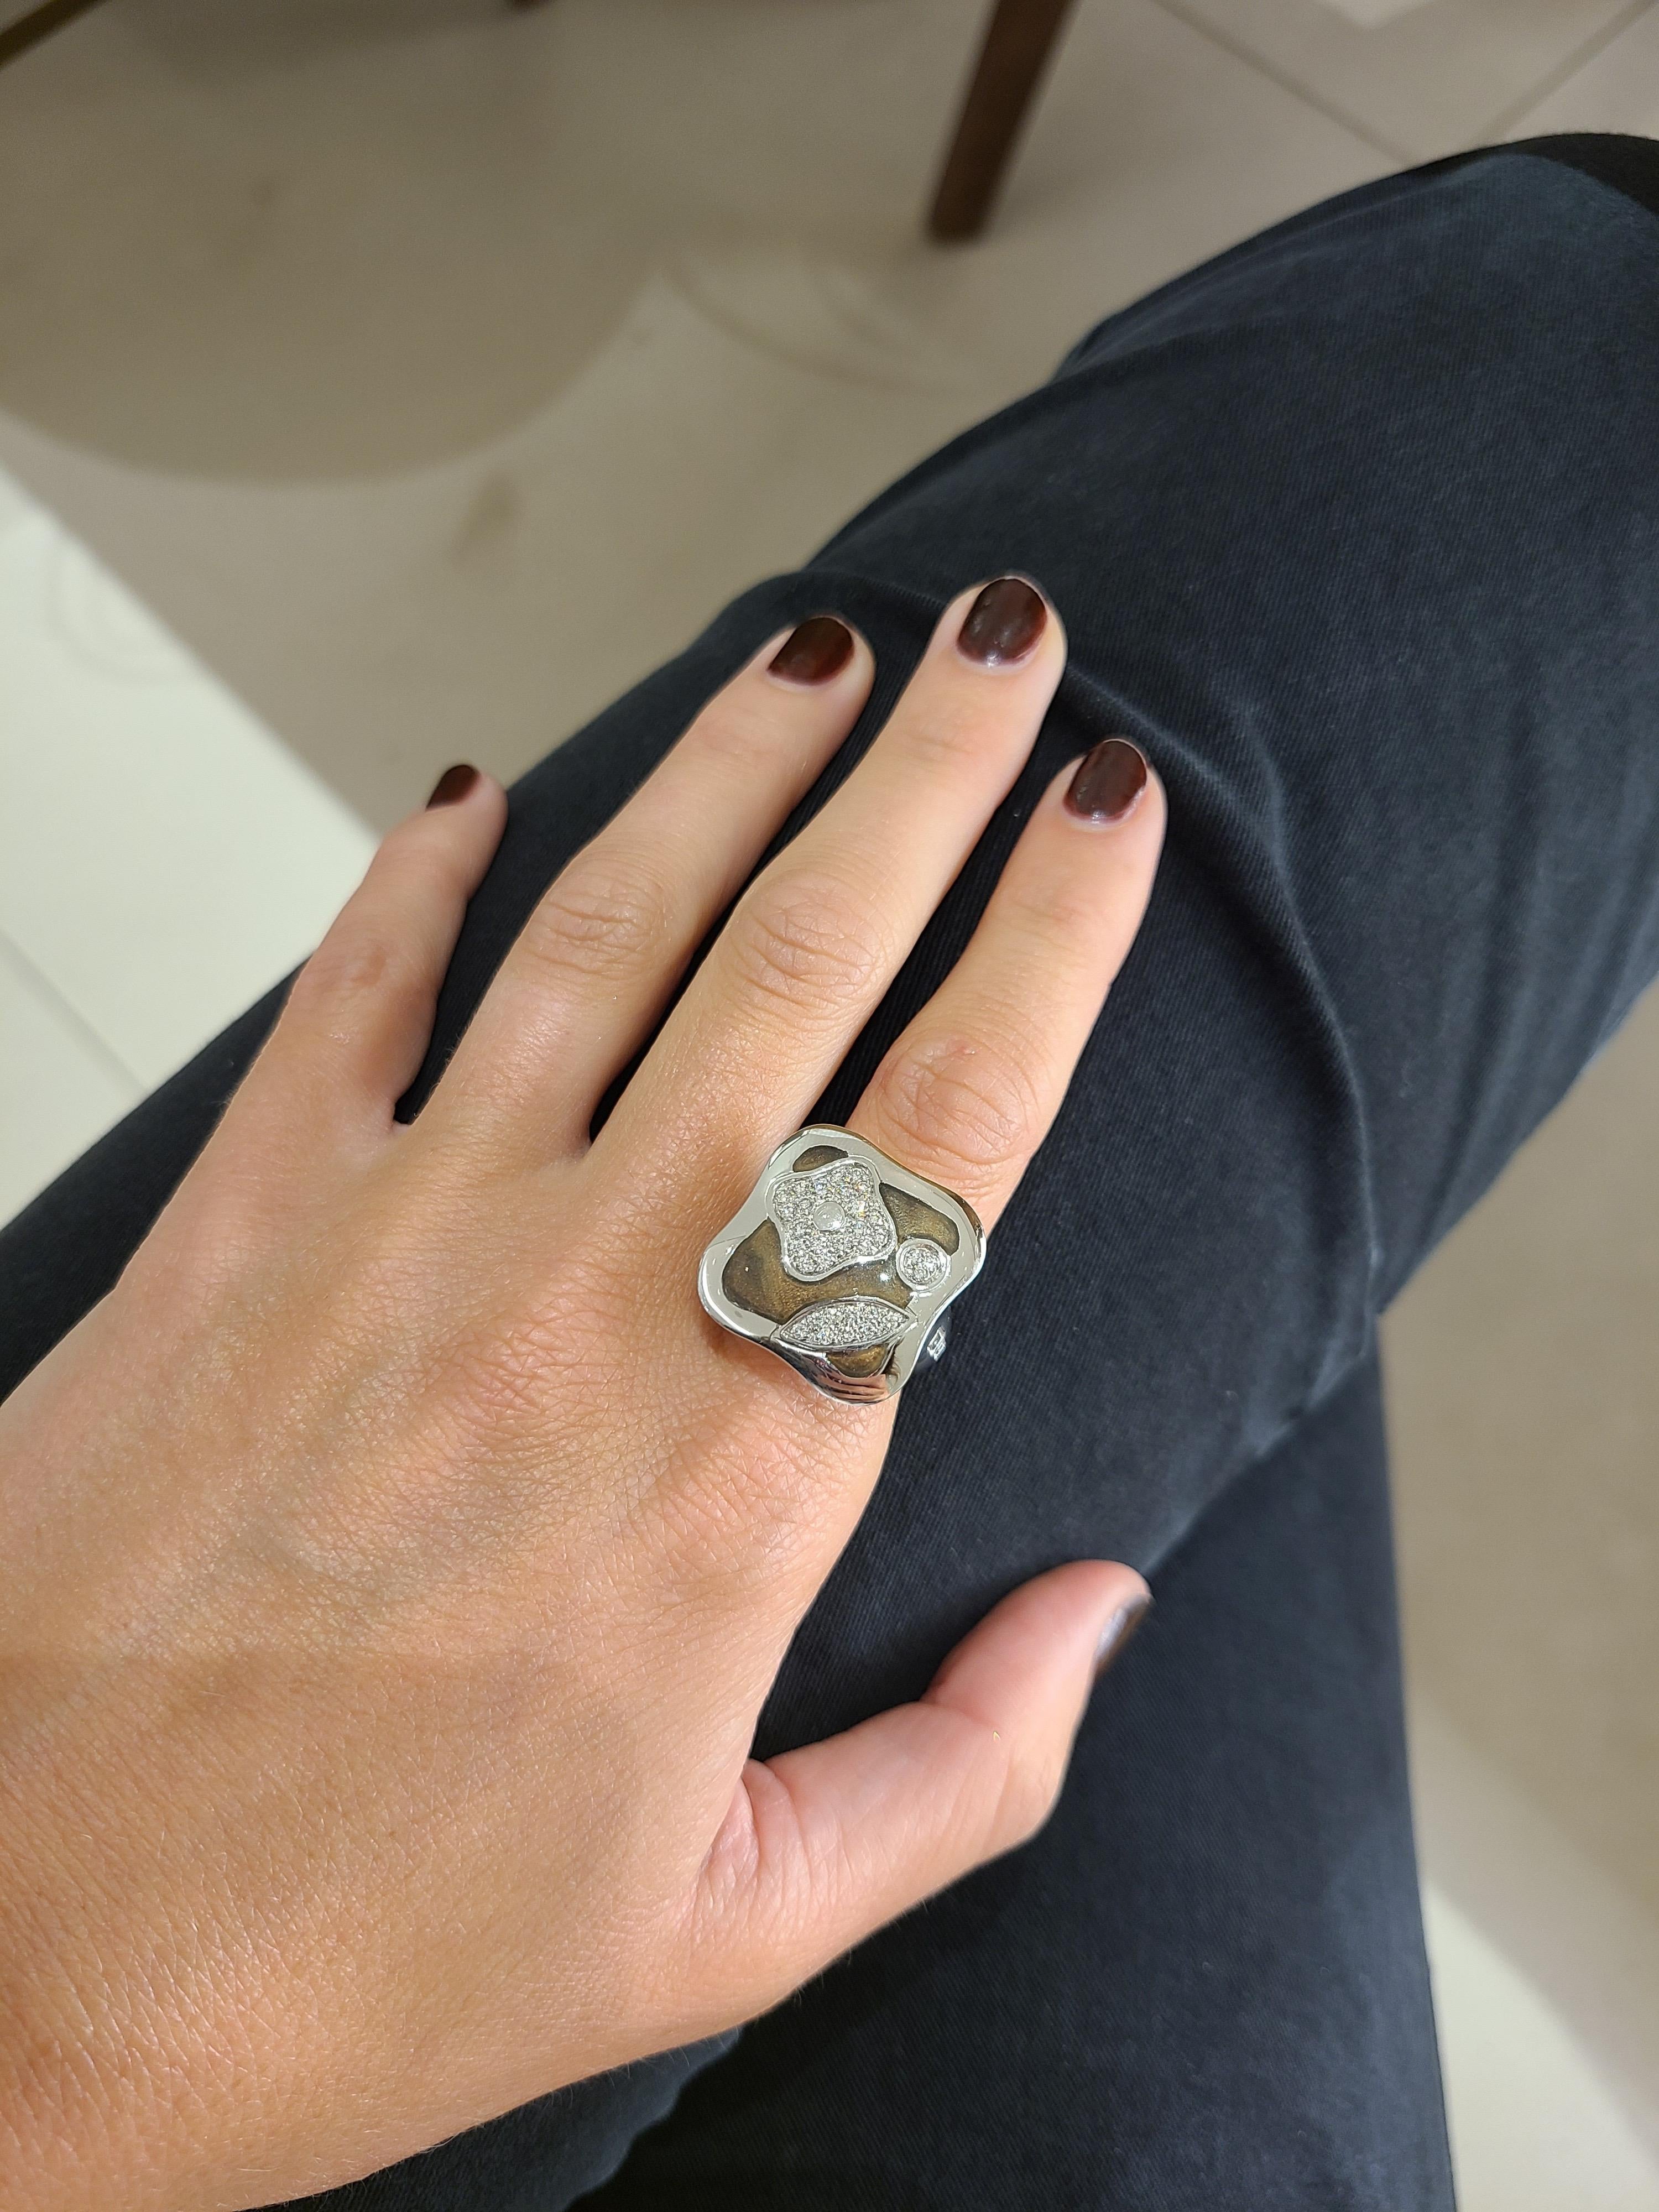 This 18 karat white gold ring was designed by the world renowned Italian company La Nouvelle Bague. They are known for their exquisite craftsmanship, marrying the classic with the modern.
This ring is from their  Fiori  collection. The word fiori